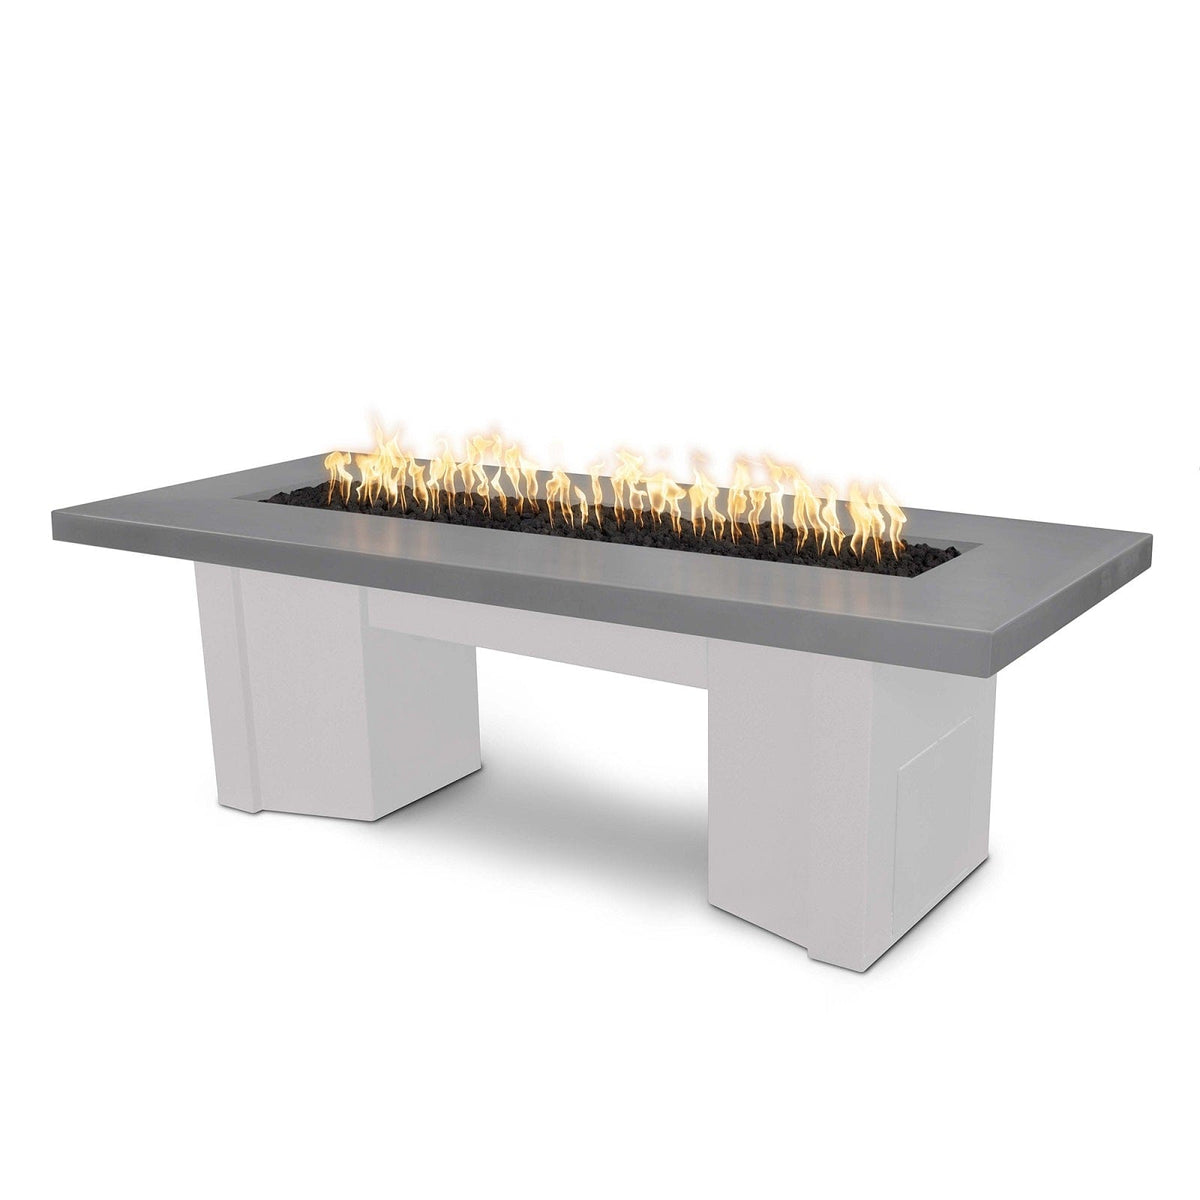 The Outdoor Plus Fire Features Natural Gray (-NGY) / White Powder Coated Steel (-WHT) The Outdoor Plus 60&quot; Alameda Fire Table Smooth Concrete in Natural Gas - Flame Sense System with Push Button Spark Igniter / OPT-ALMGFRC60FSEN-NG